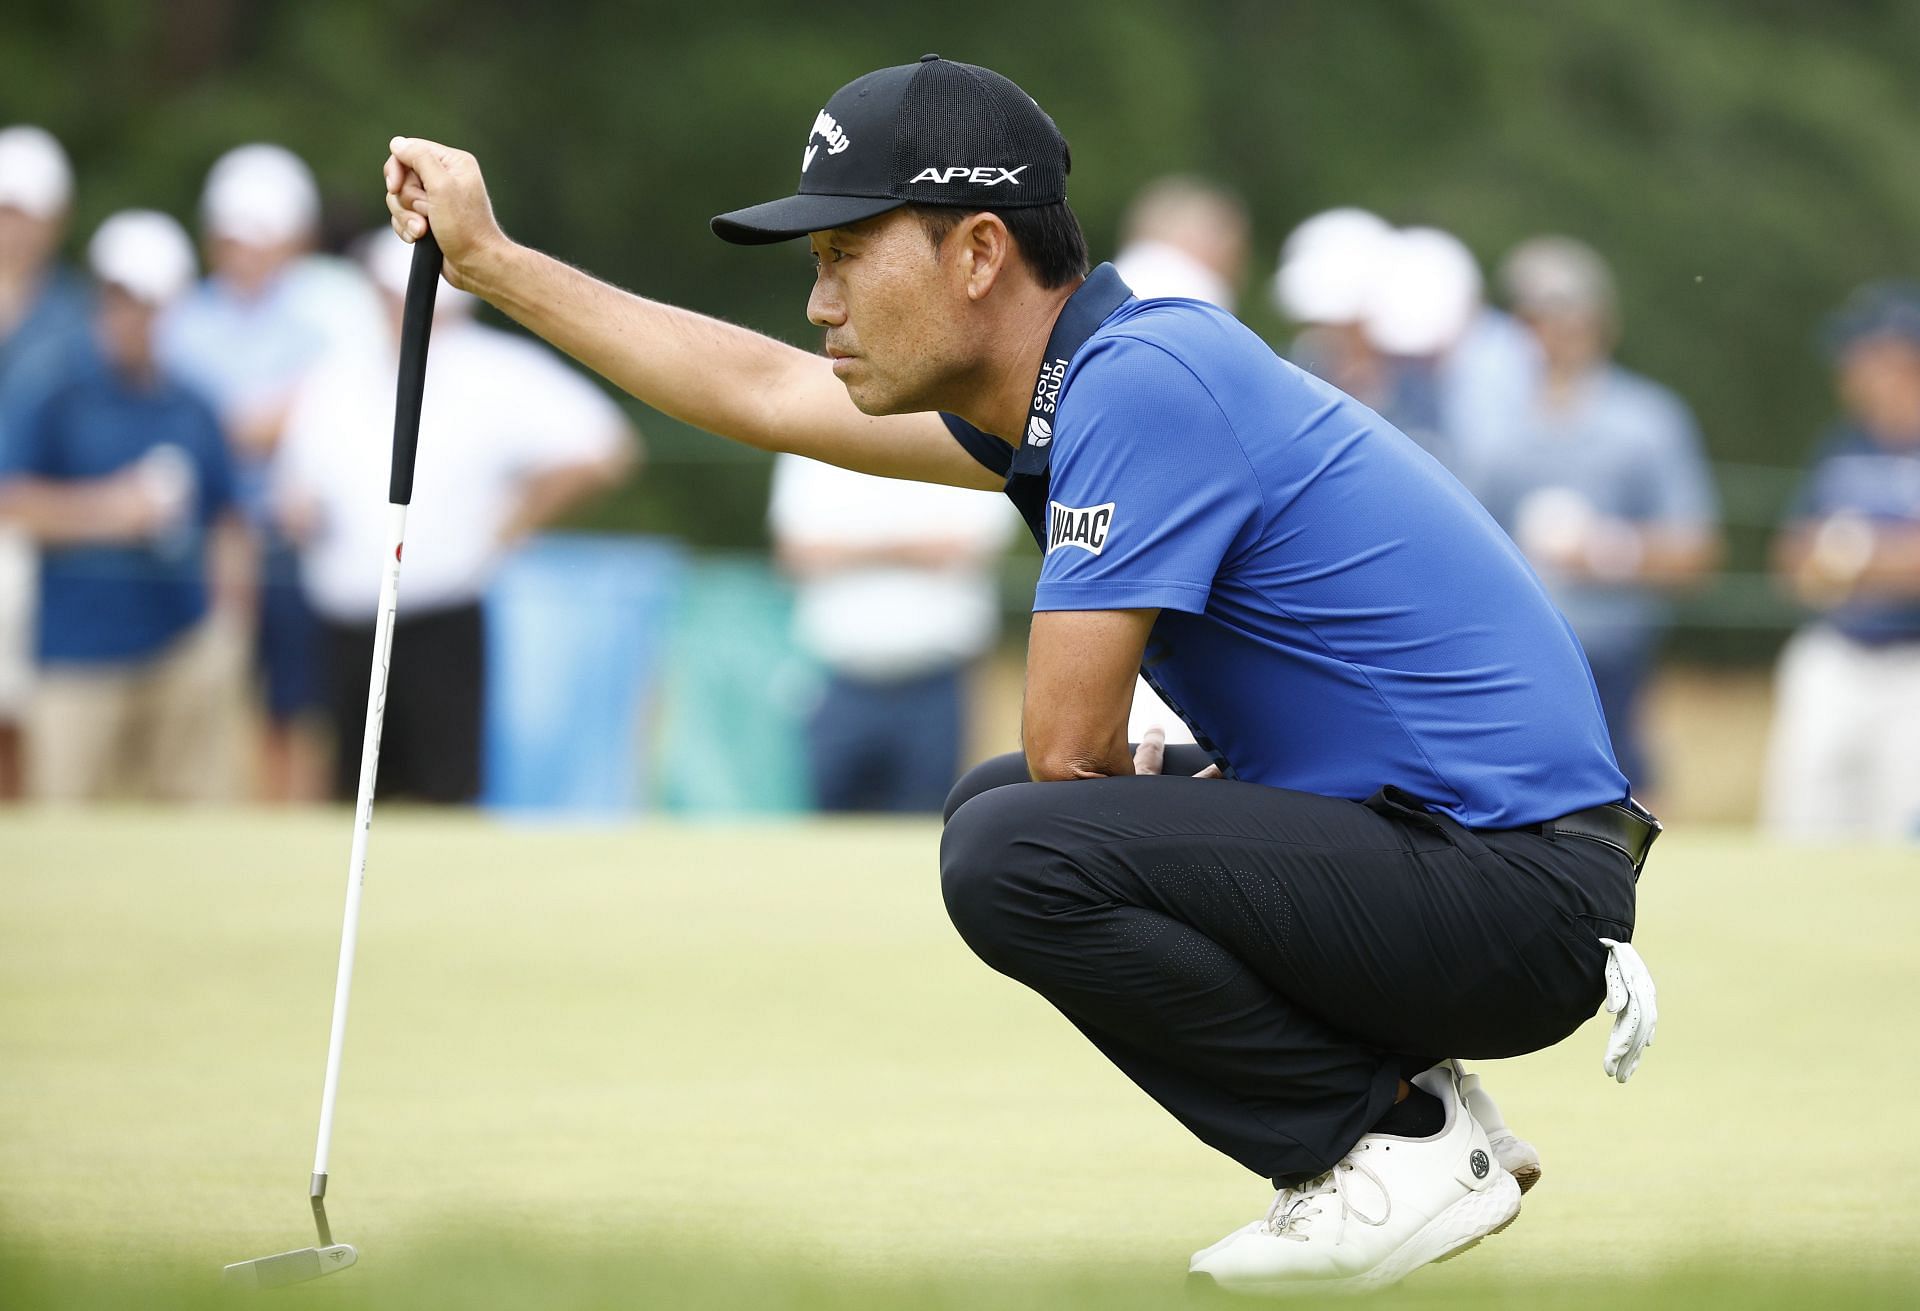 Kevin Na at the 122nd U.S. Open Championship - Round Two (Image via Jared C. Tilton/Getty Images)